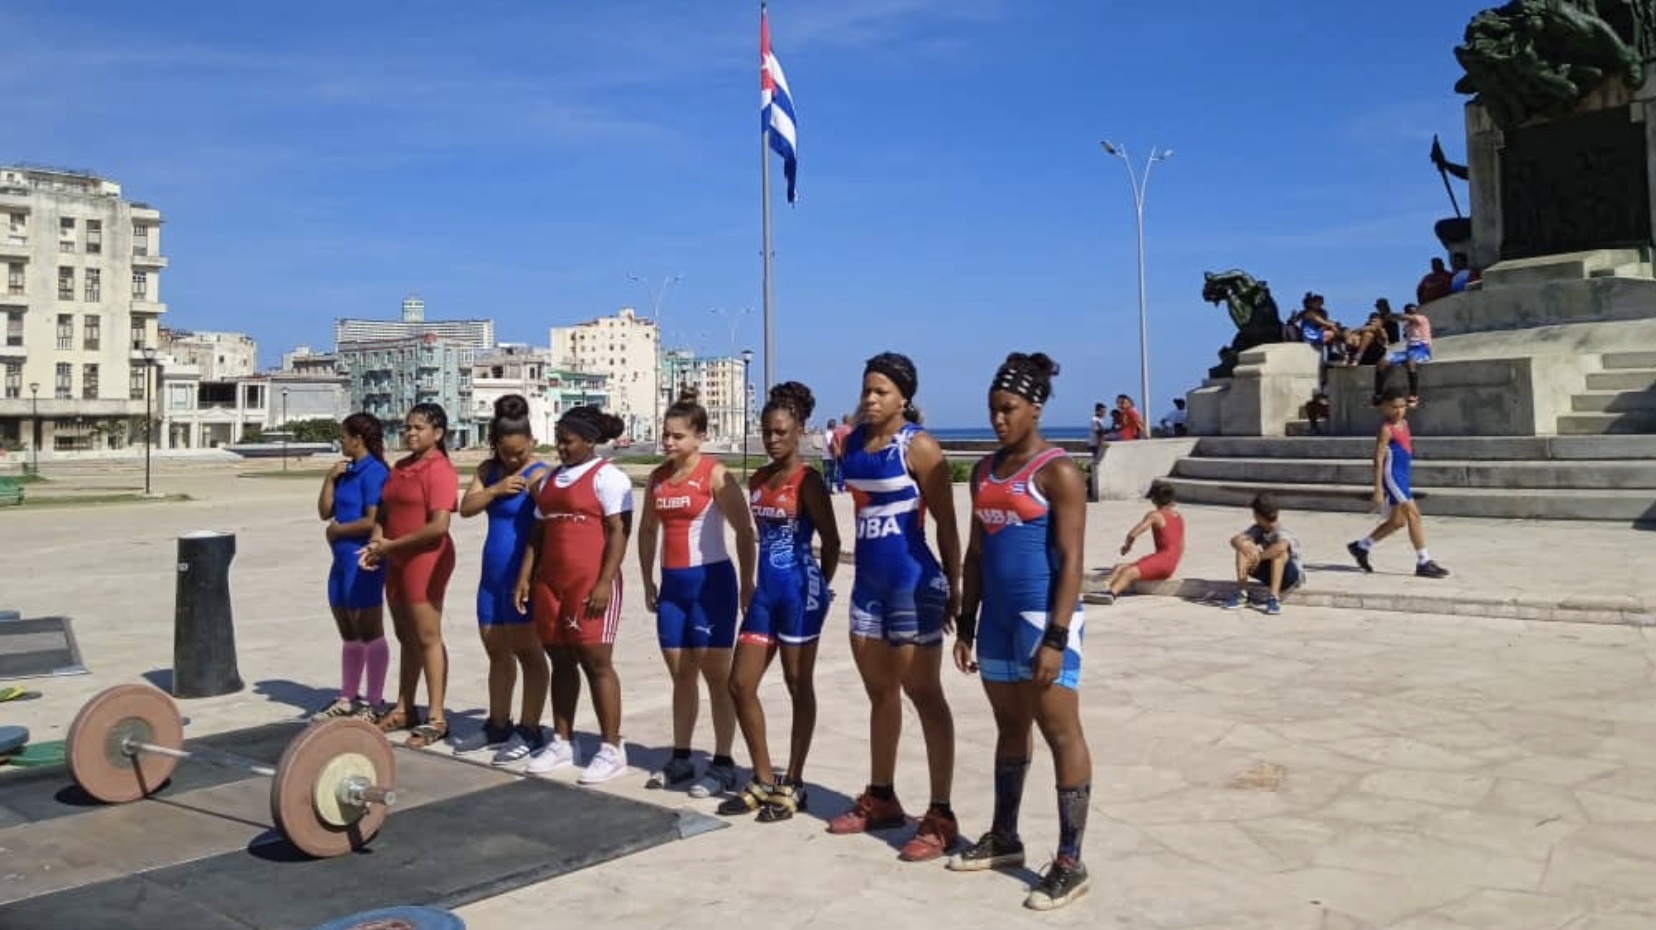 Urban weightlifting had its latest outing in Havana, Cuba ©Brian Oliver 